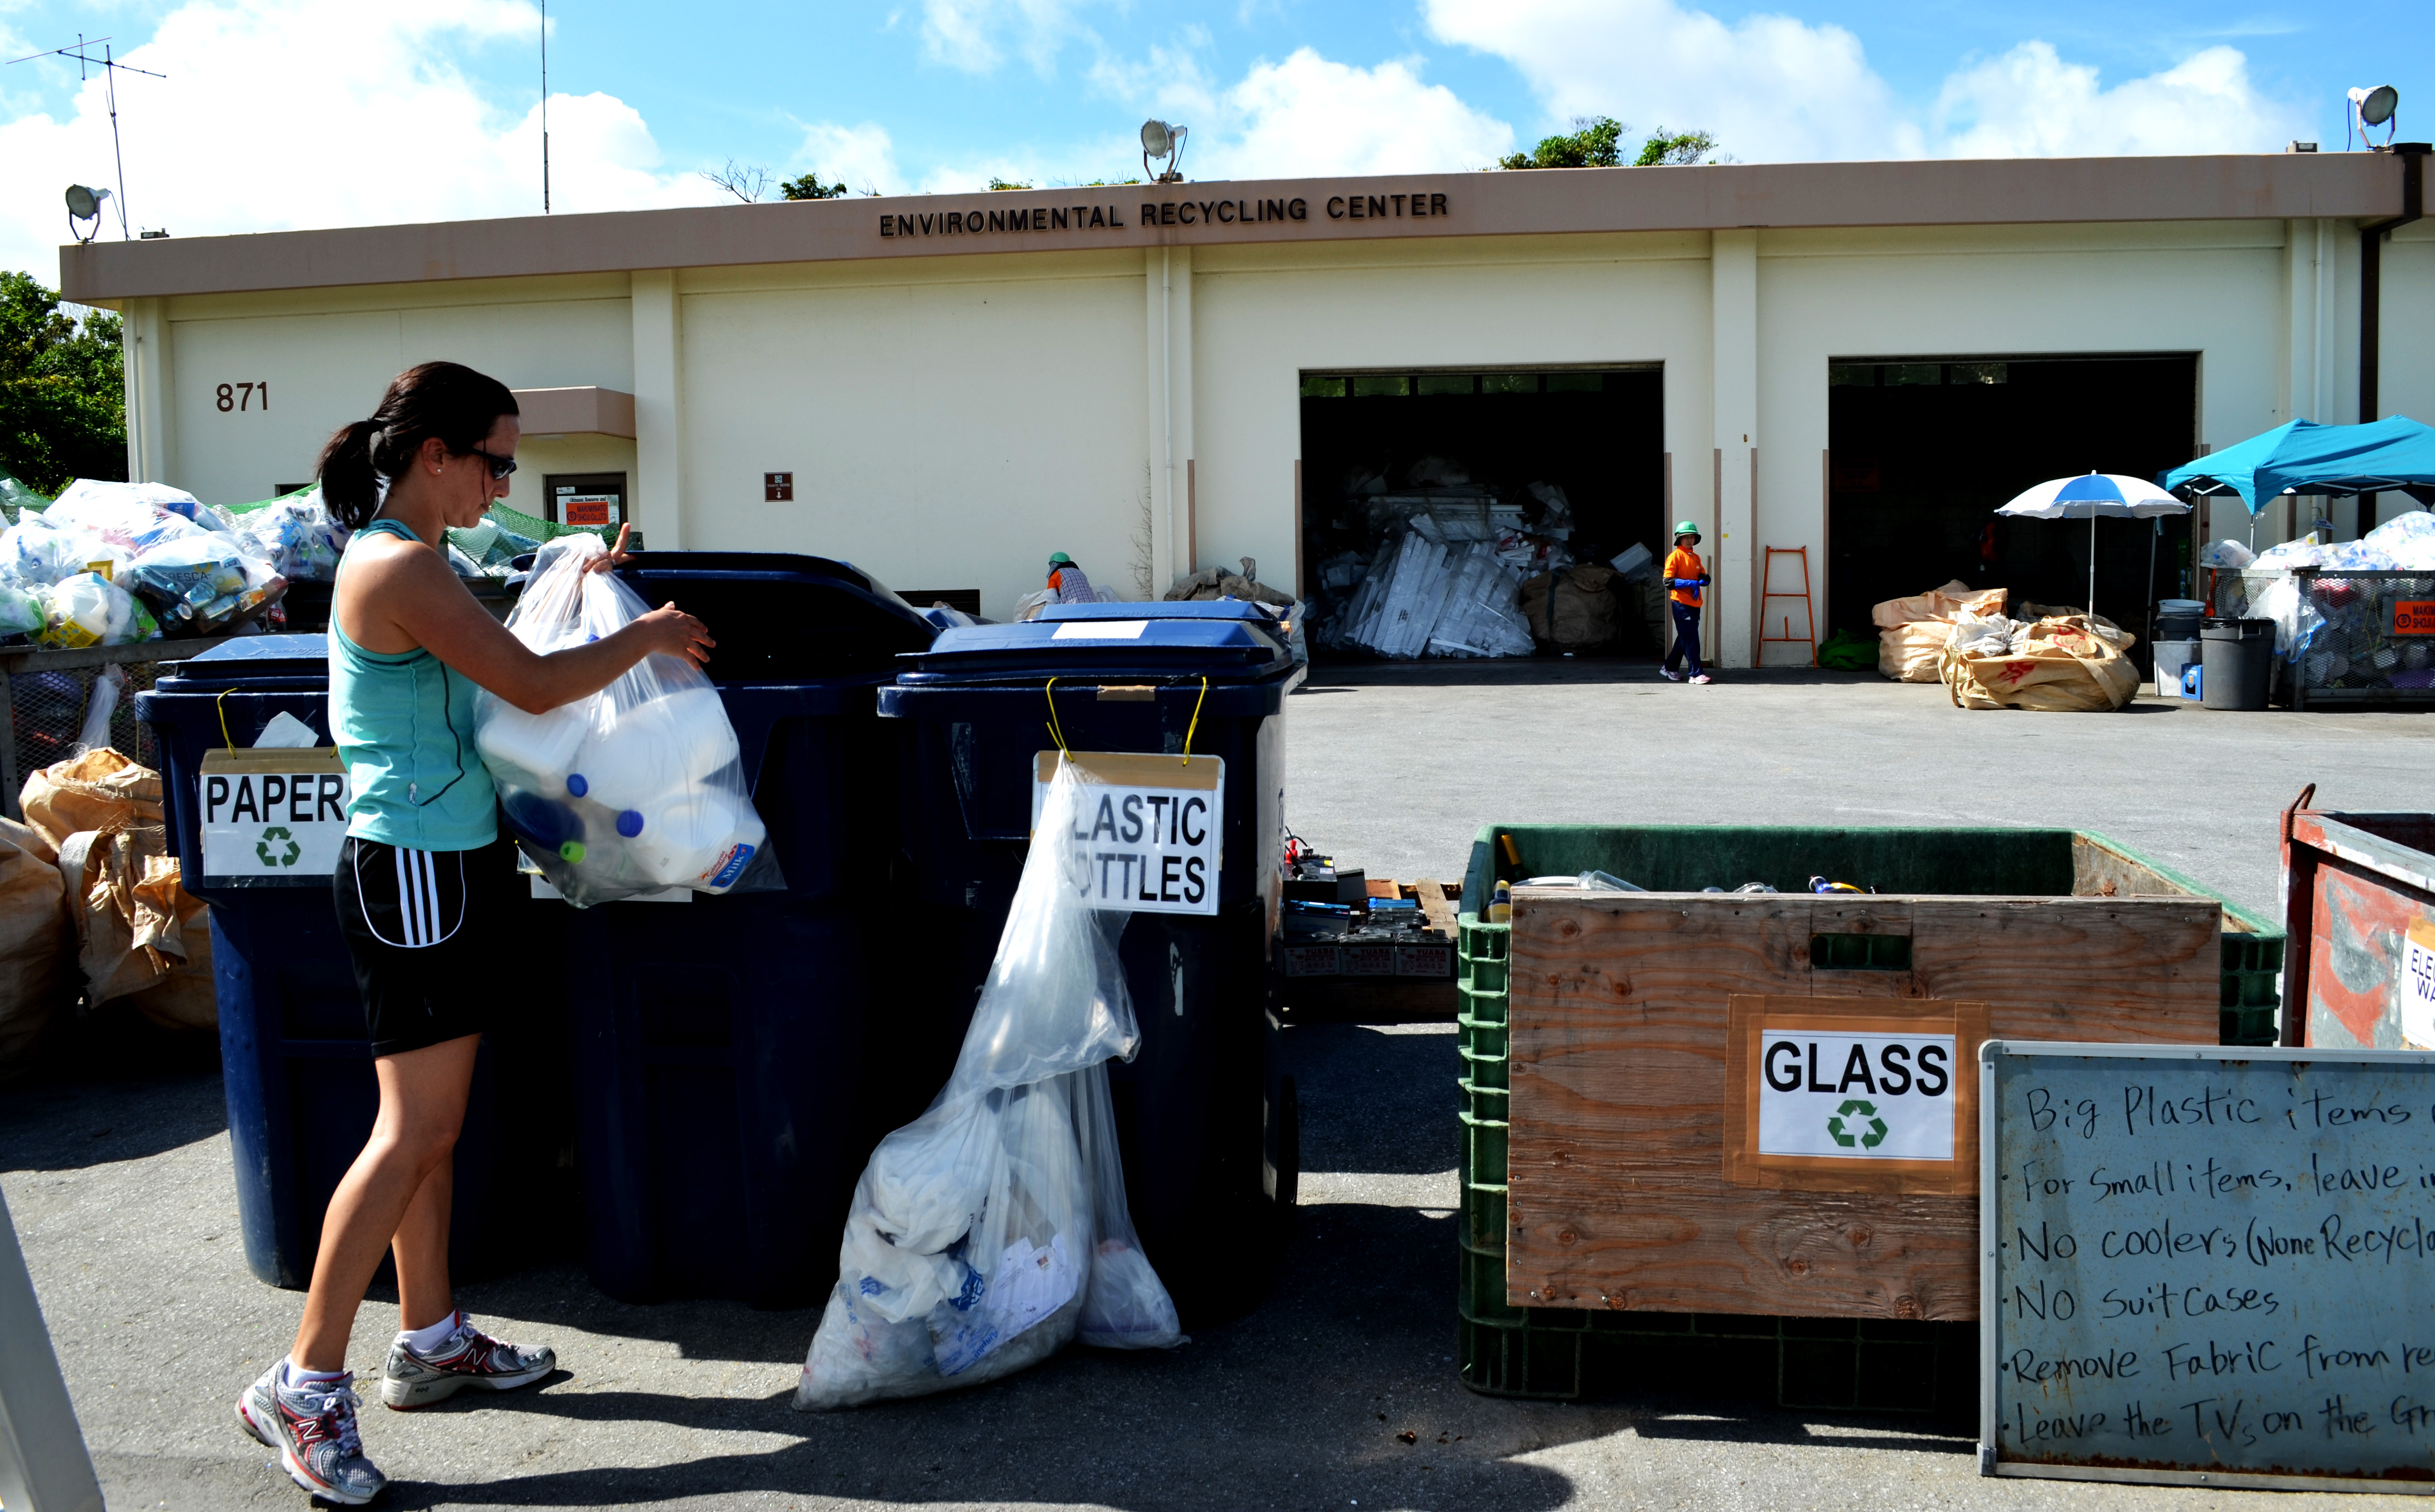 Kadena residents, units reminded to separate recyclables, use clear bags >  Kadena Air Base > News